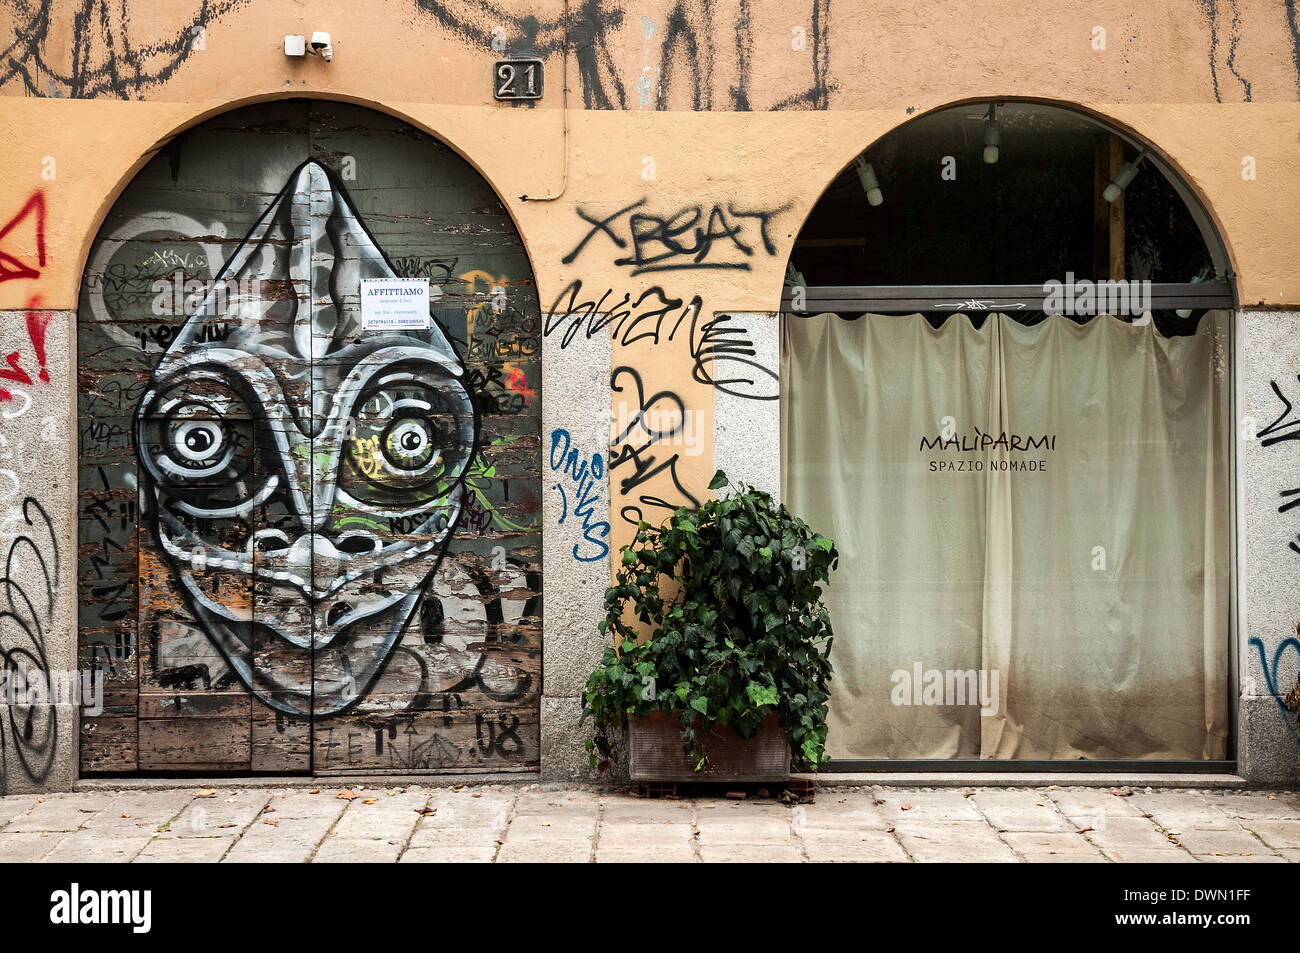 Shop with door decorated by graffiti representing an alien face, Milan, Lombardy, Italy Stock Photo